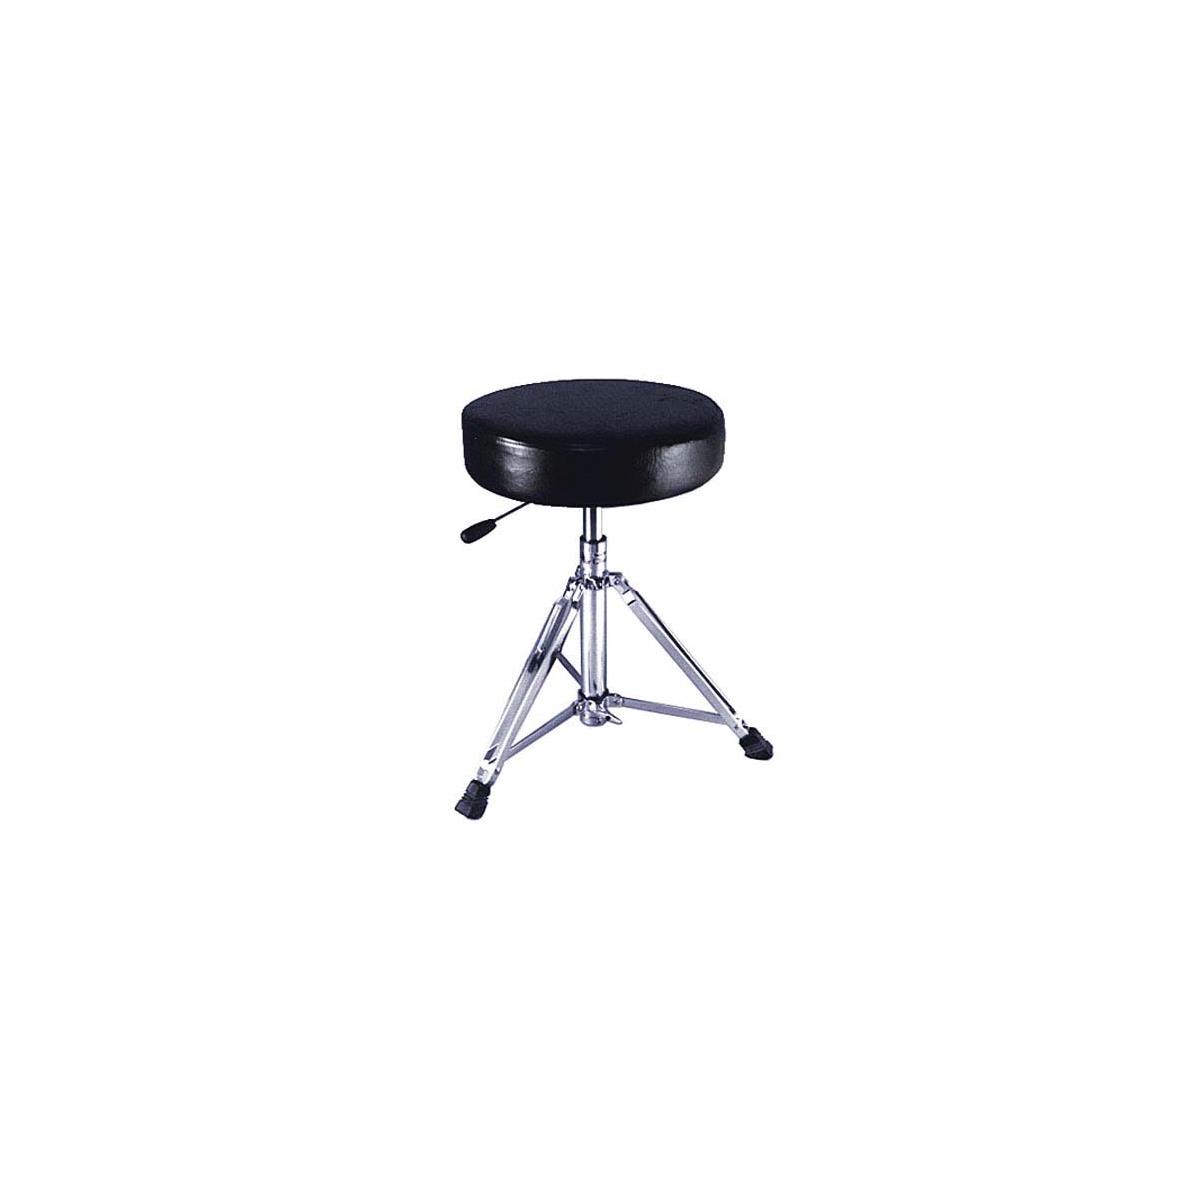 Image of Tele Vue Air-Chair 21-28&quot;Adjustable Height Telescope Observation Chair